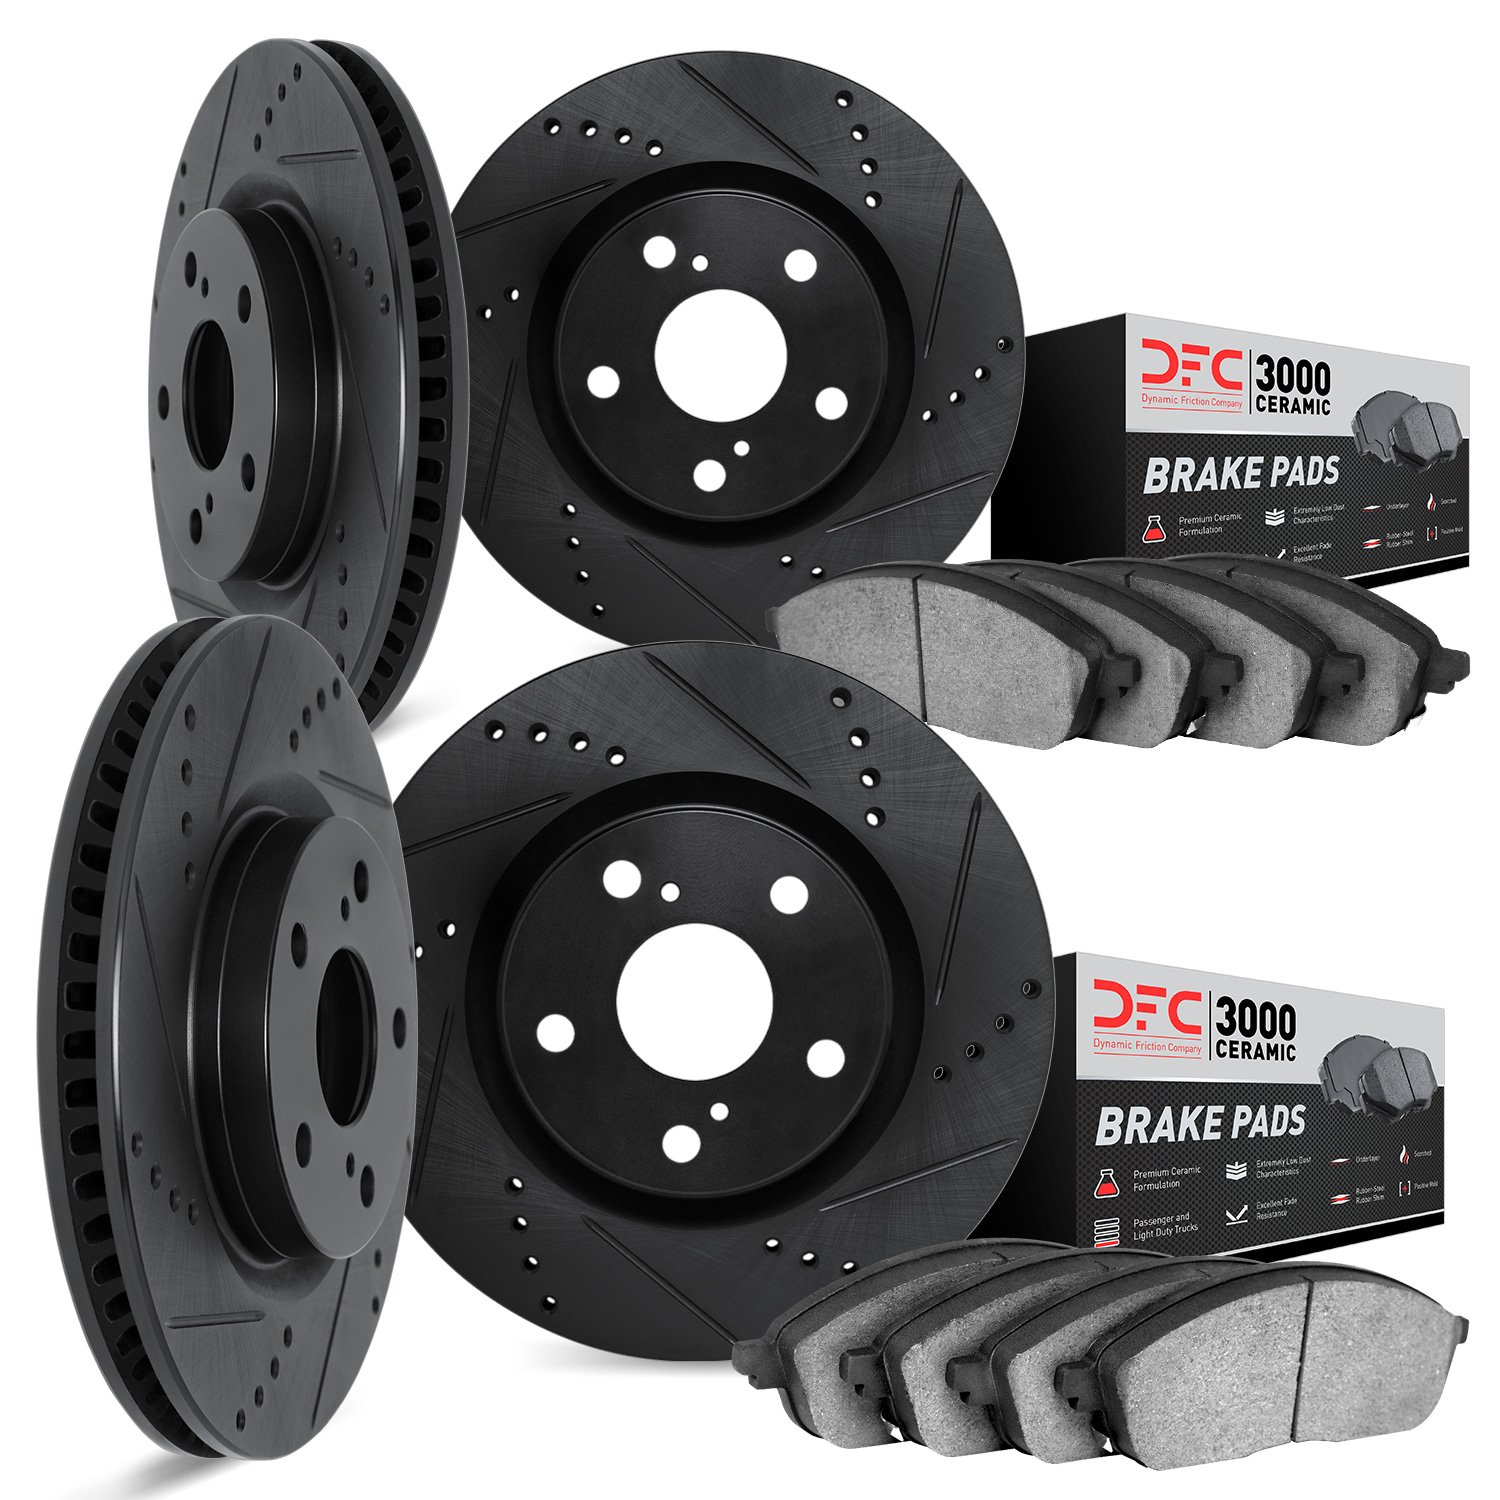 8304-31086 Drilled/Slotted Brake Rotors with 3000-Series Ceramic Brake Pads Kit [Black], 2011-2018 BMW, Position: Front and Rear